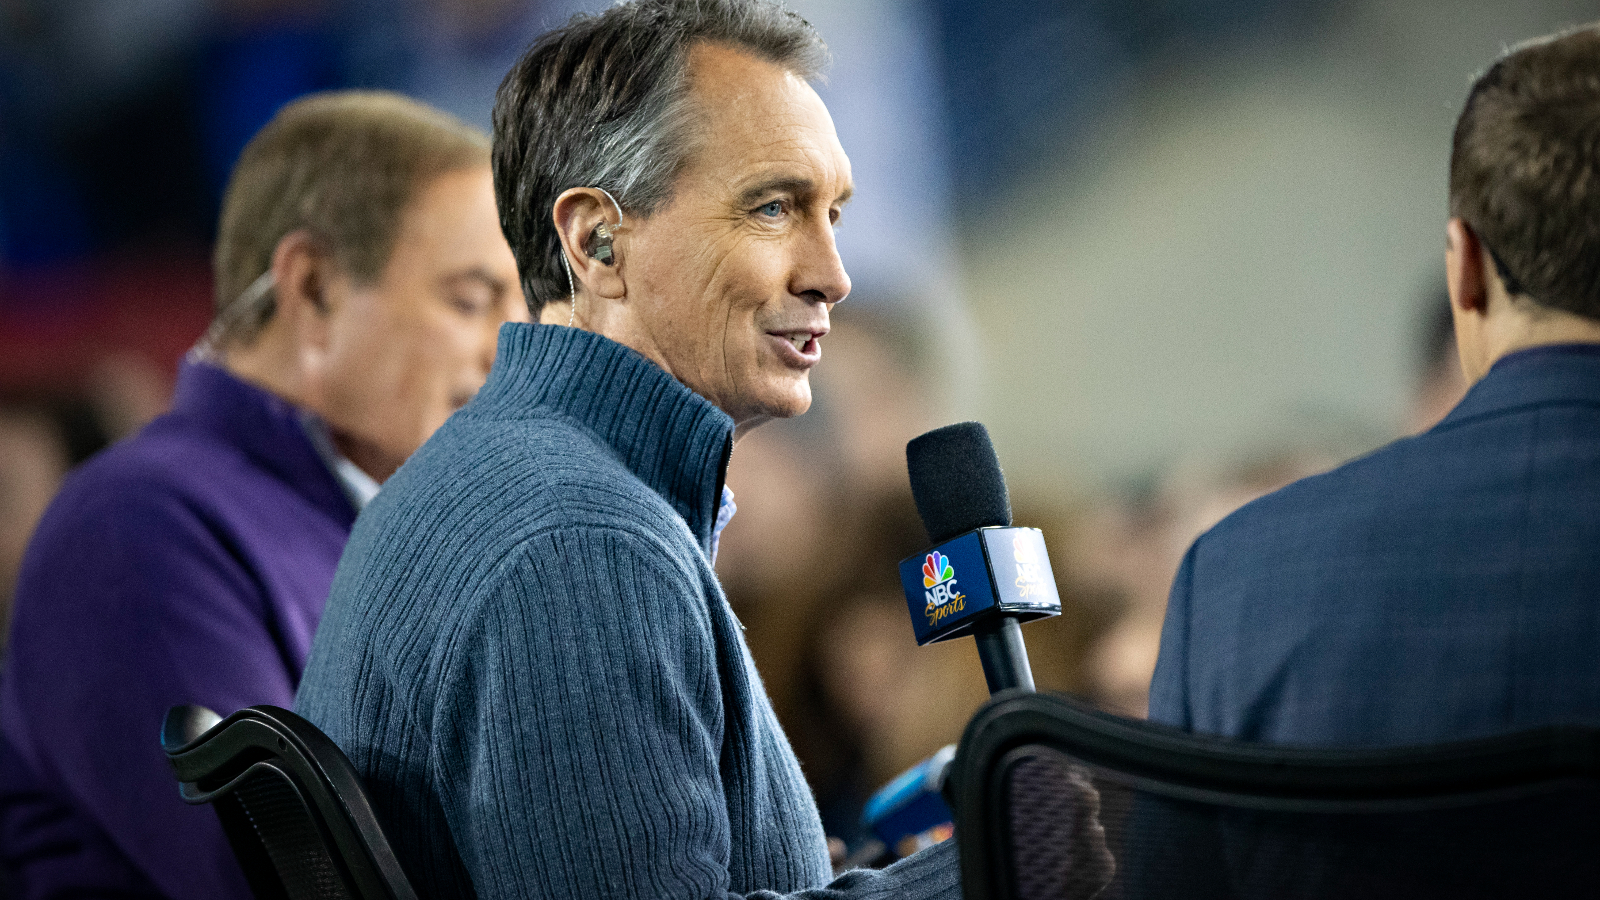 Dan Patrick] Cris Collinsworth claims NBC would air 17 Dallas Cowboys games  if they could : r/nfl